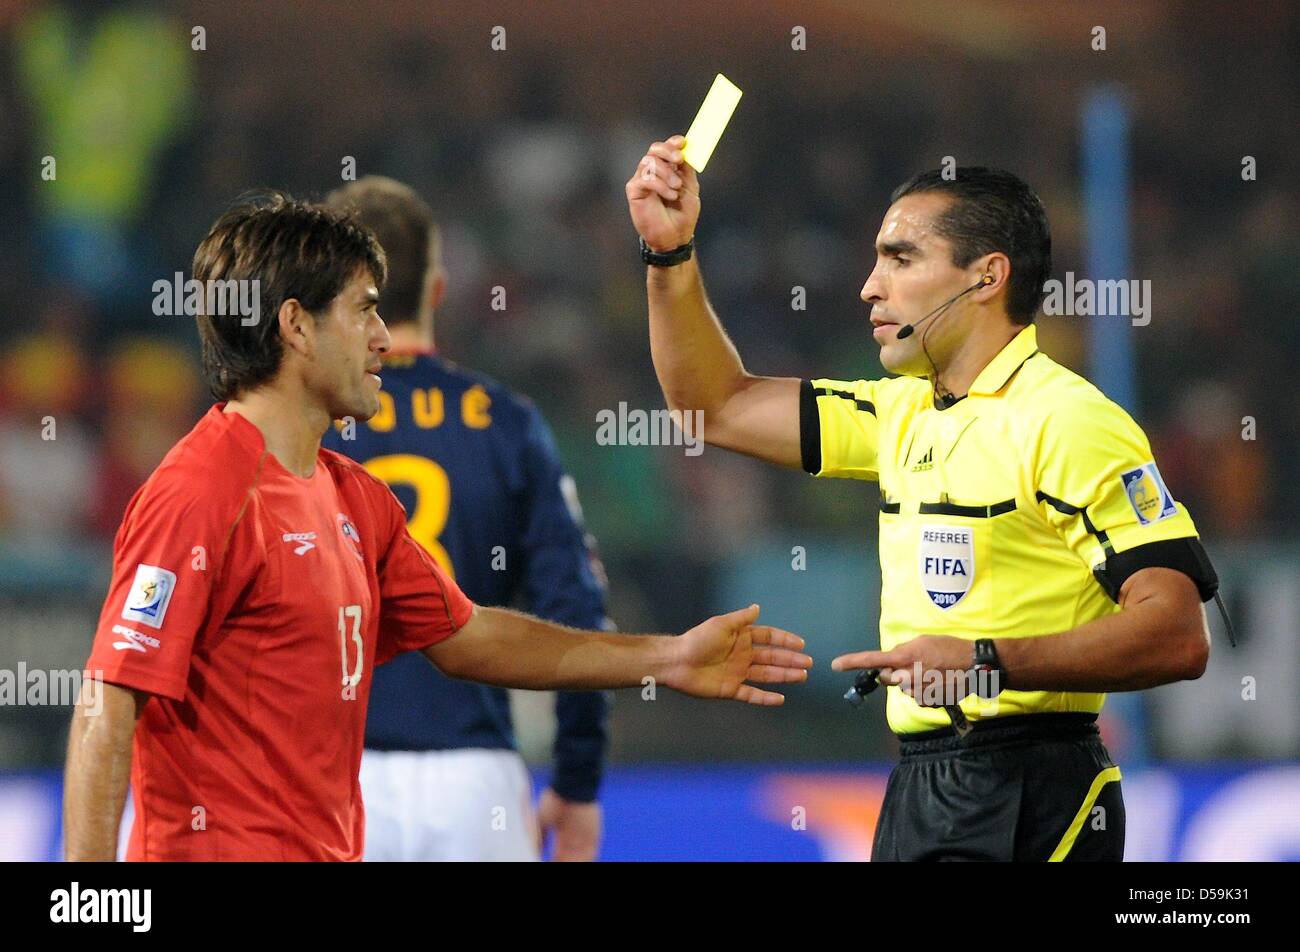 Chile's Marco Estrada is booked with the yellow card by Mexican referee Marco Rodriguez during the 2010 FIFA World Cup group H match between Chile and Spain at Loftus Versfeld Stadium in Pretoria, South Africa 25 June 2010. Photo: Marcus Brandt dpa - Please refer to http://dpaq.de/FIFA-WM2010-TC Stock Photo